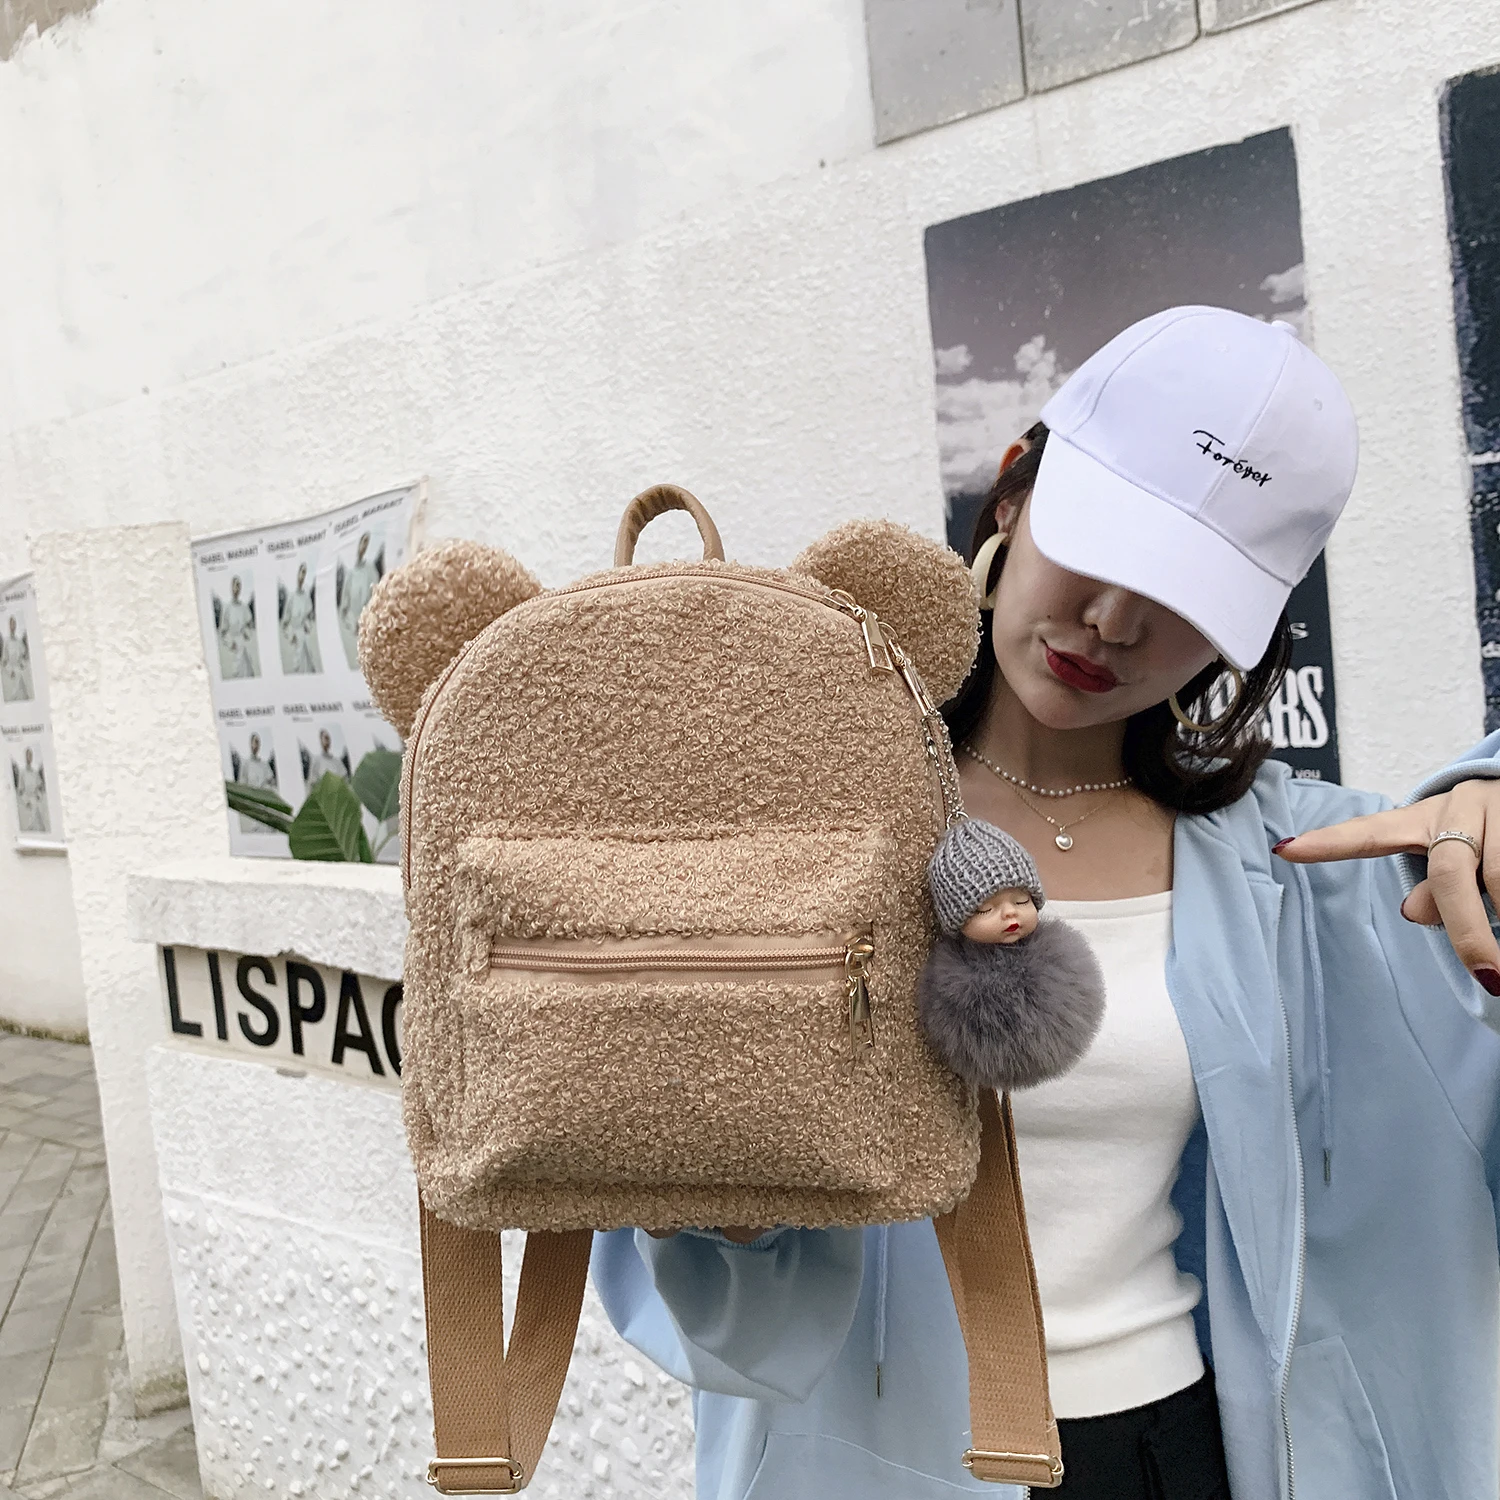 Bear Ears Furry Backpack For Girls 2021 Autum/Winter New Kawaii Backpack Plush Cute Faux Fur Women Shoulders Bag Solid Color